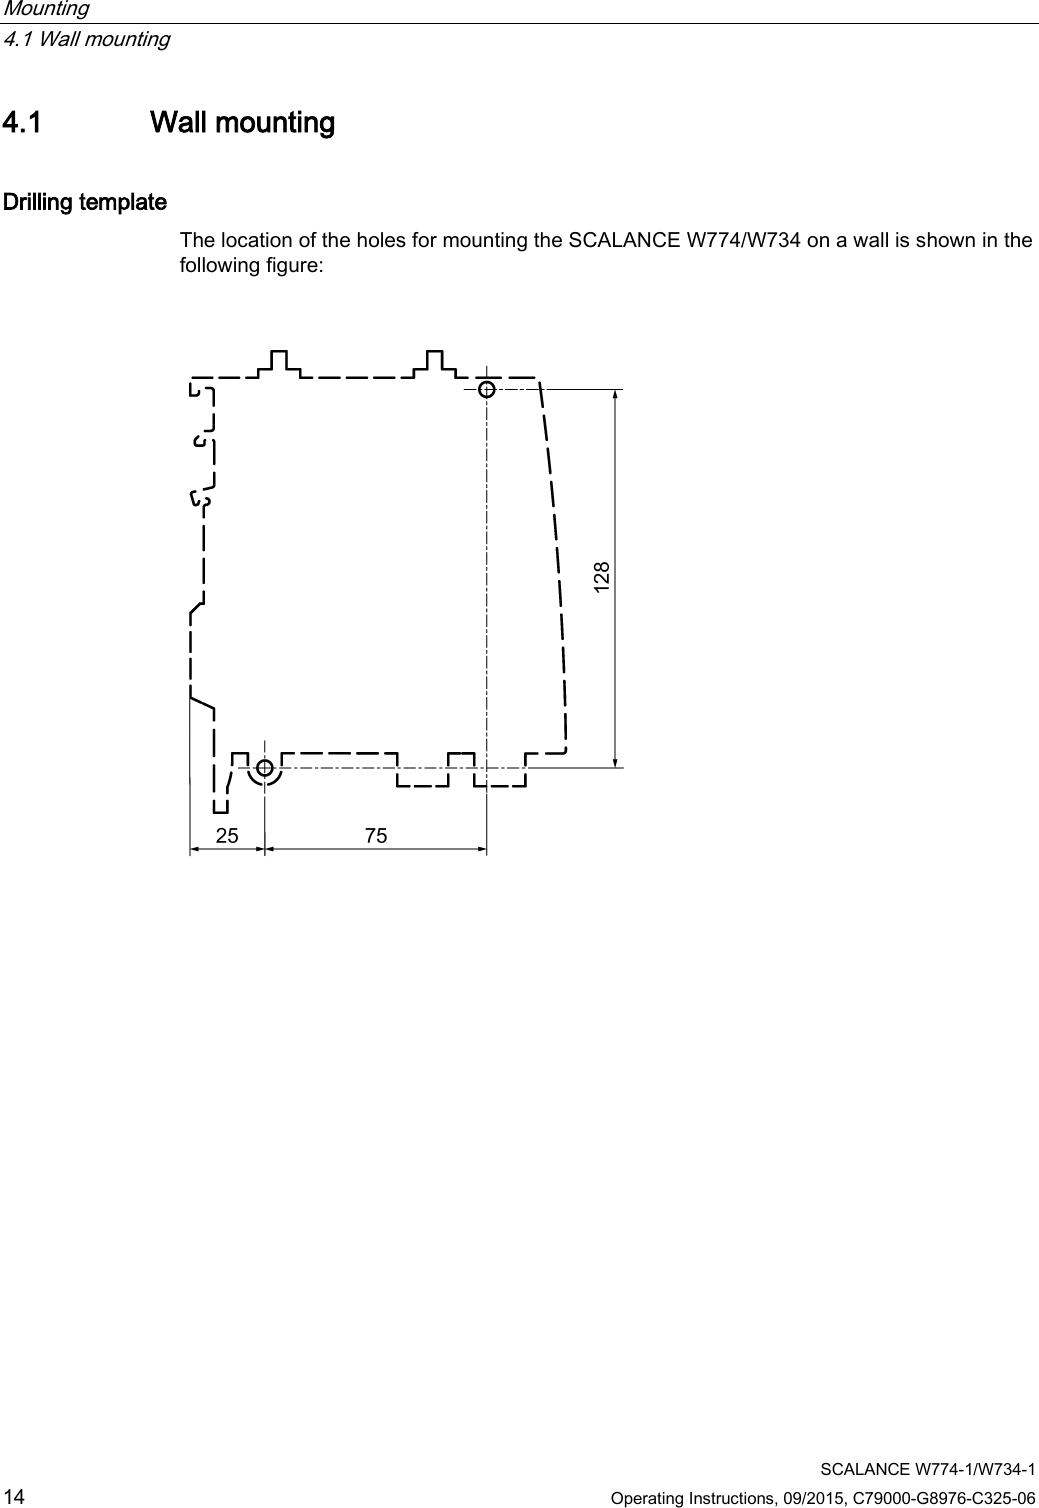 Mounting   4.1 Wall mounting  SCALANCE W774-1/W734-1 14 Operating Instructions, 09/2015, C79000-G8976-C325-06 4.1 Wall mounting Drilling template The location of the holes for mounting the SCALANCE W774/W734 on a wall is shown in the following figure:   